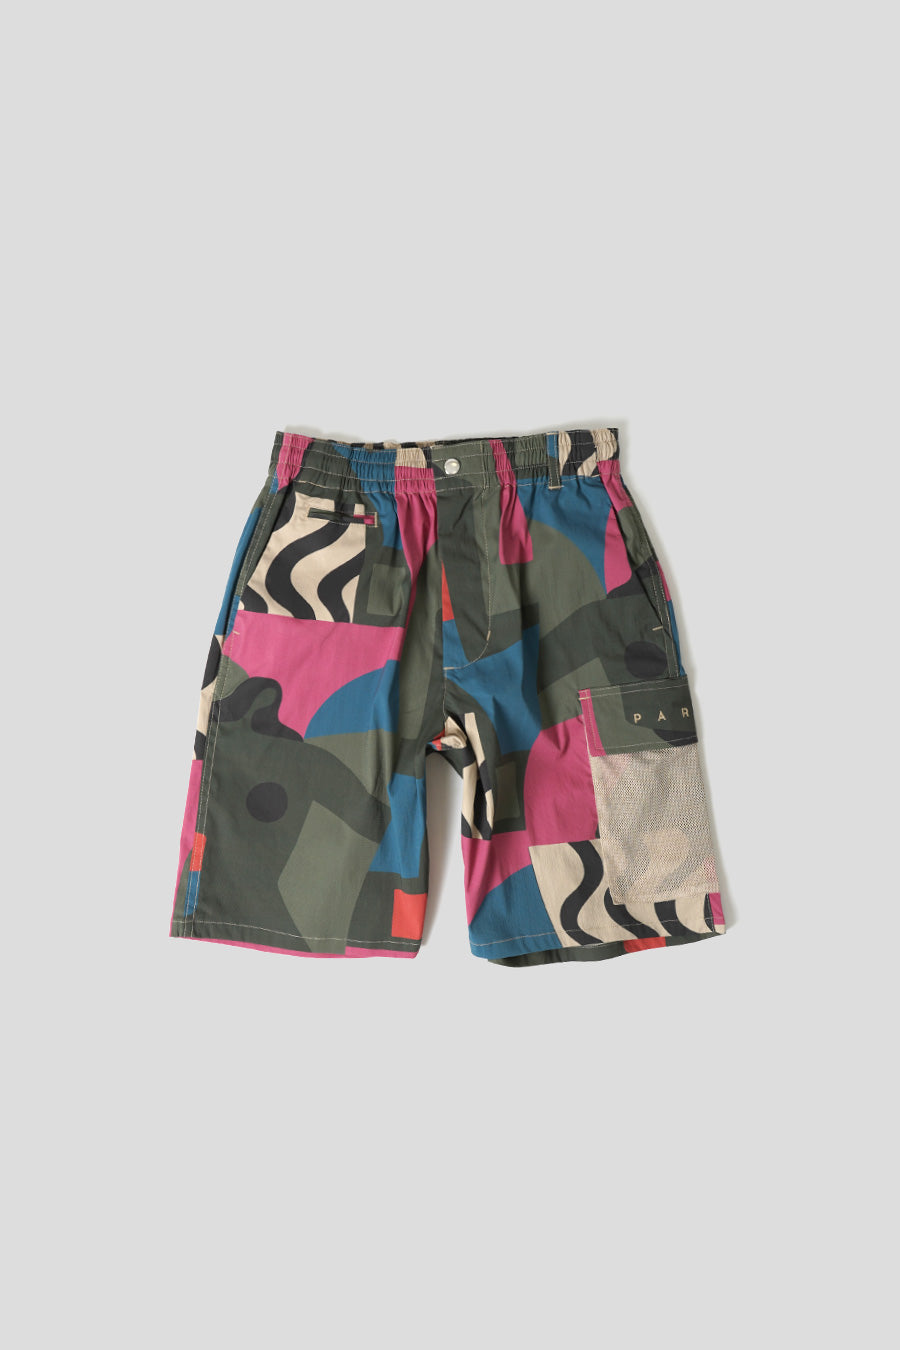 BY PARRA - SHORT DISTORTED CAMO ROSE - LE LABO STORE